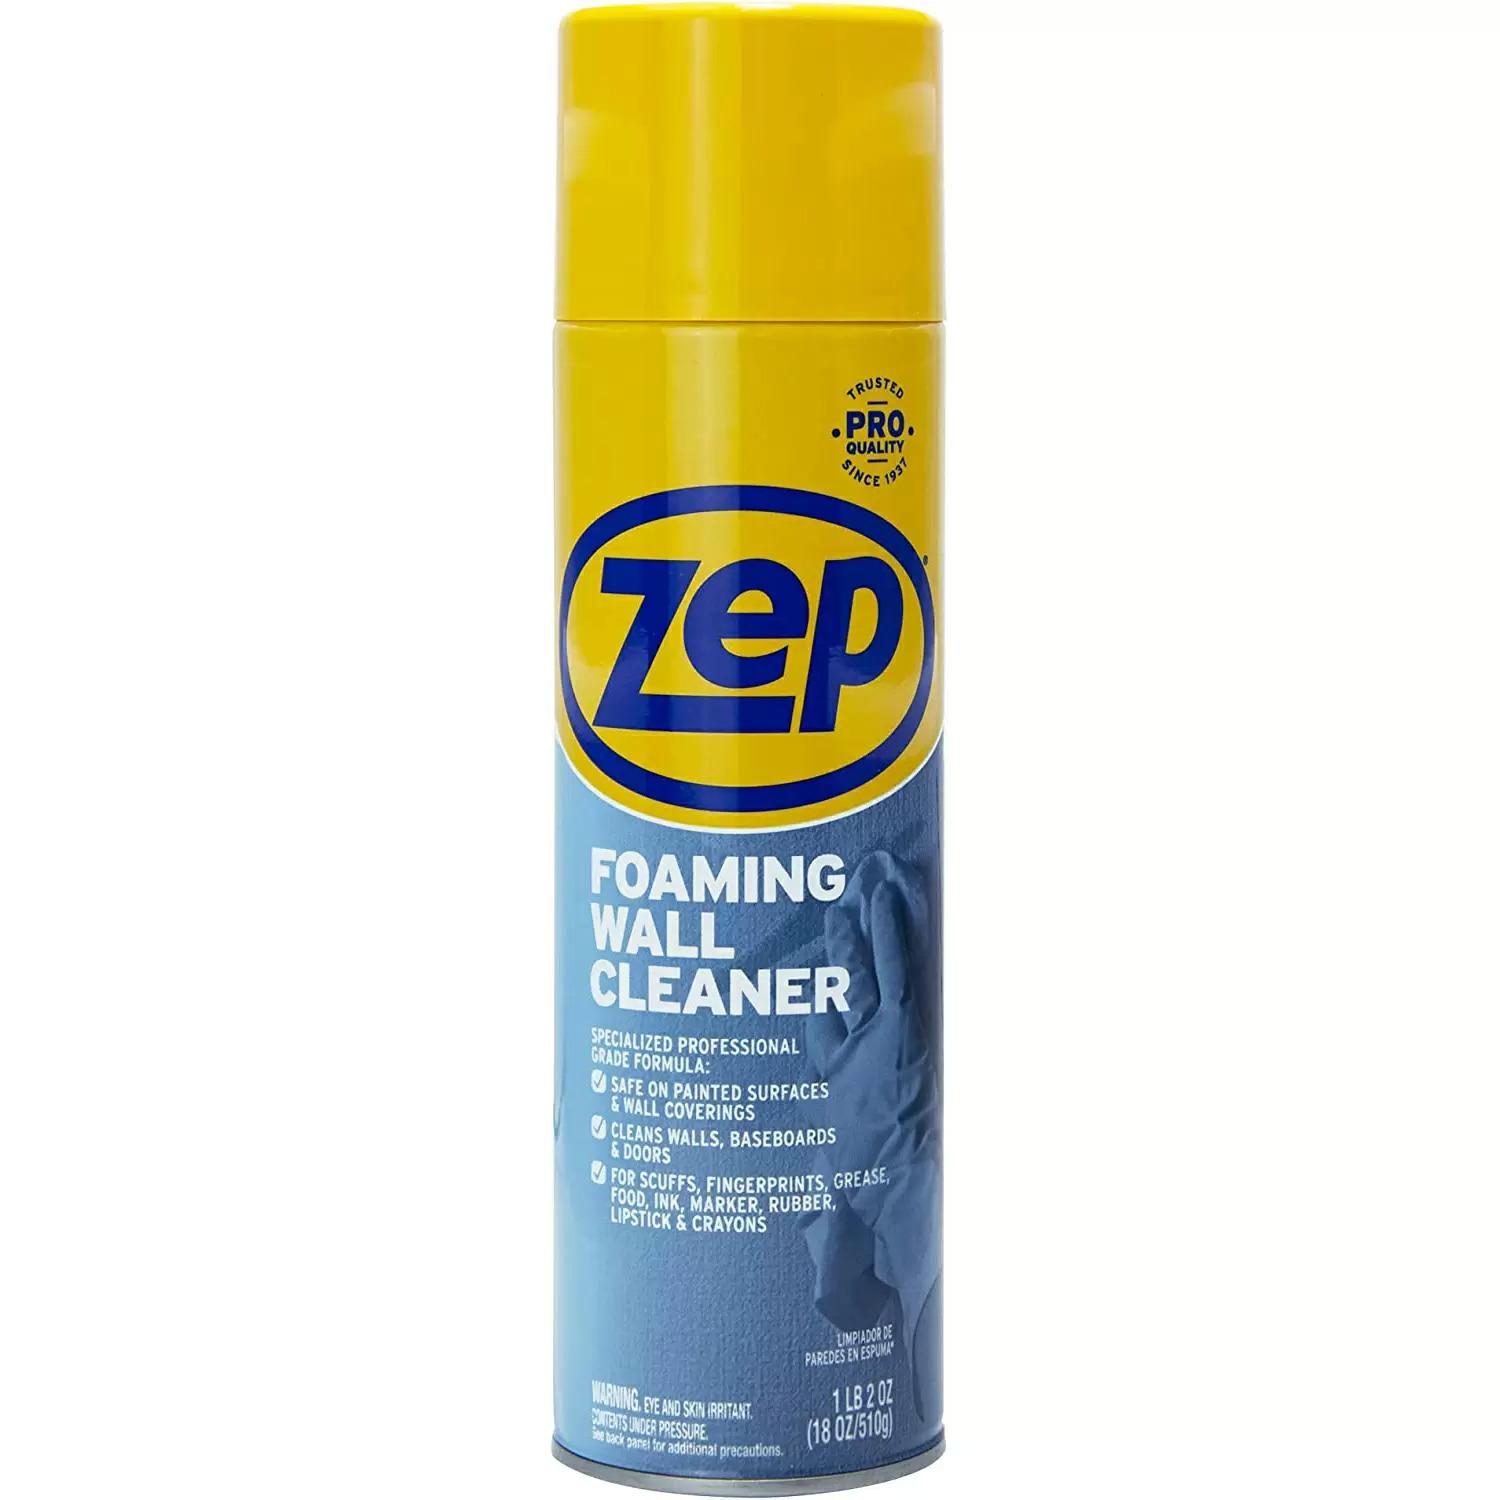 Zep Foaming Wall Cleaner for $5.48 Shipped